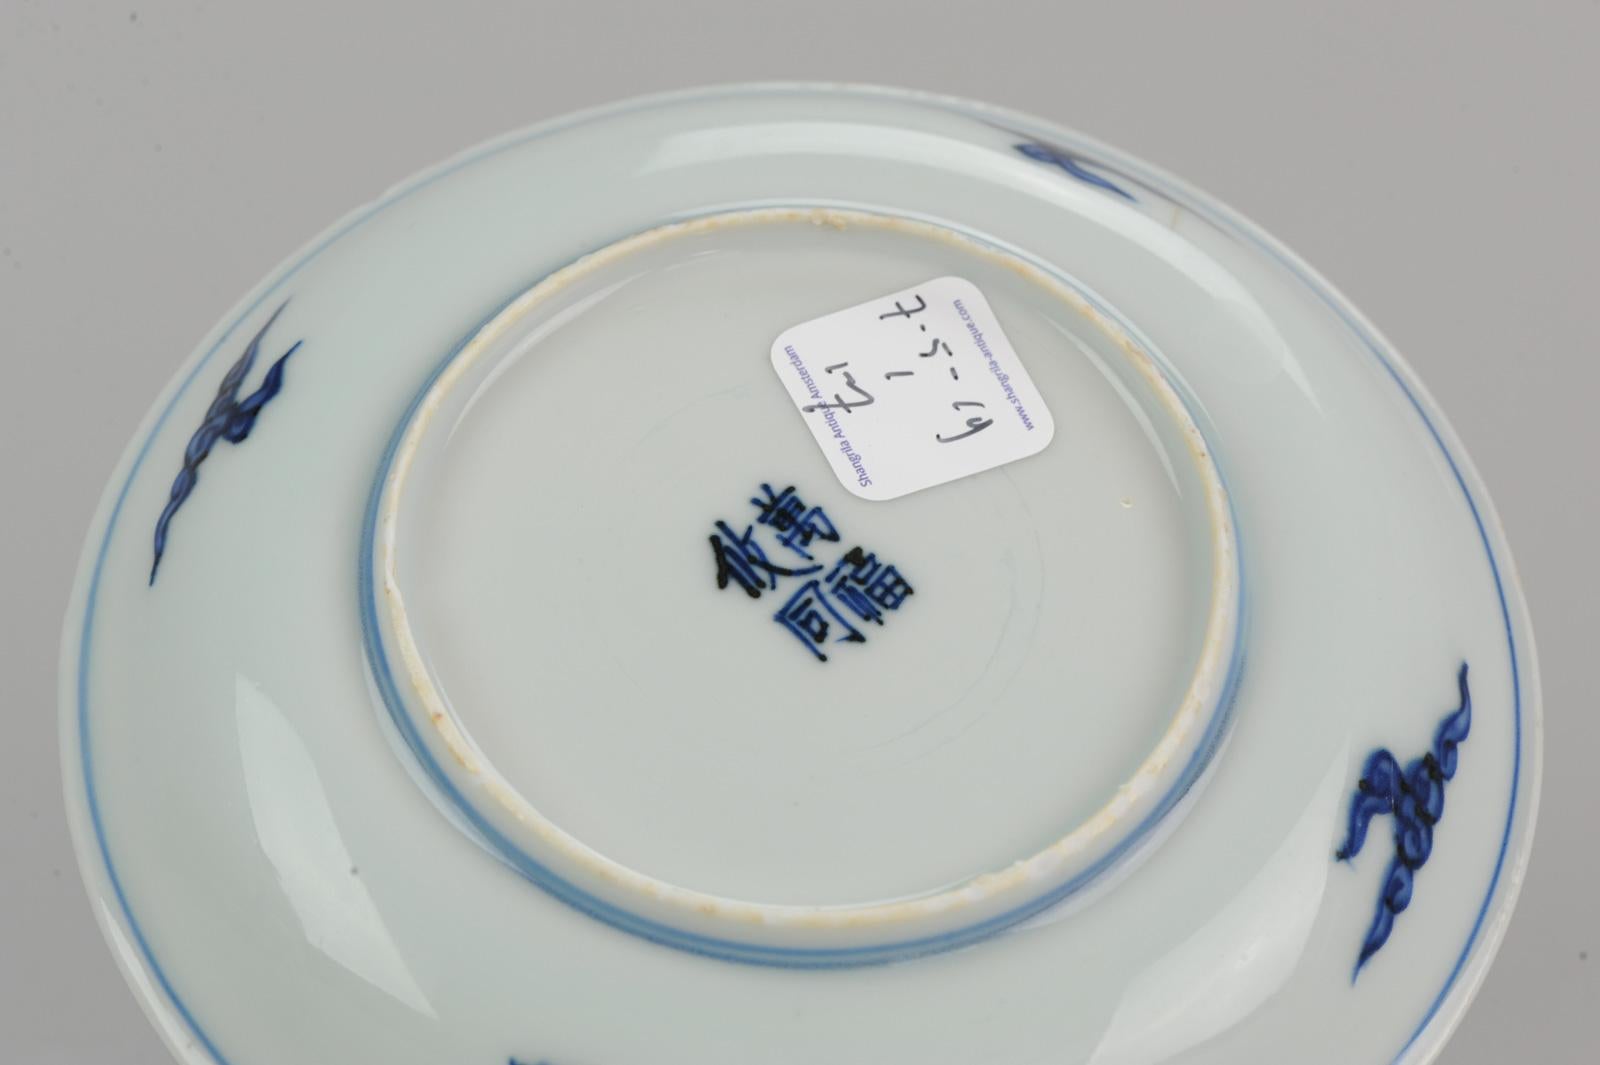 18th Century and Earlier Antique Chinese Porcelain Plate 17th Century Ming Dynasty Tianqi/Chongzhen